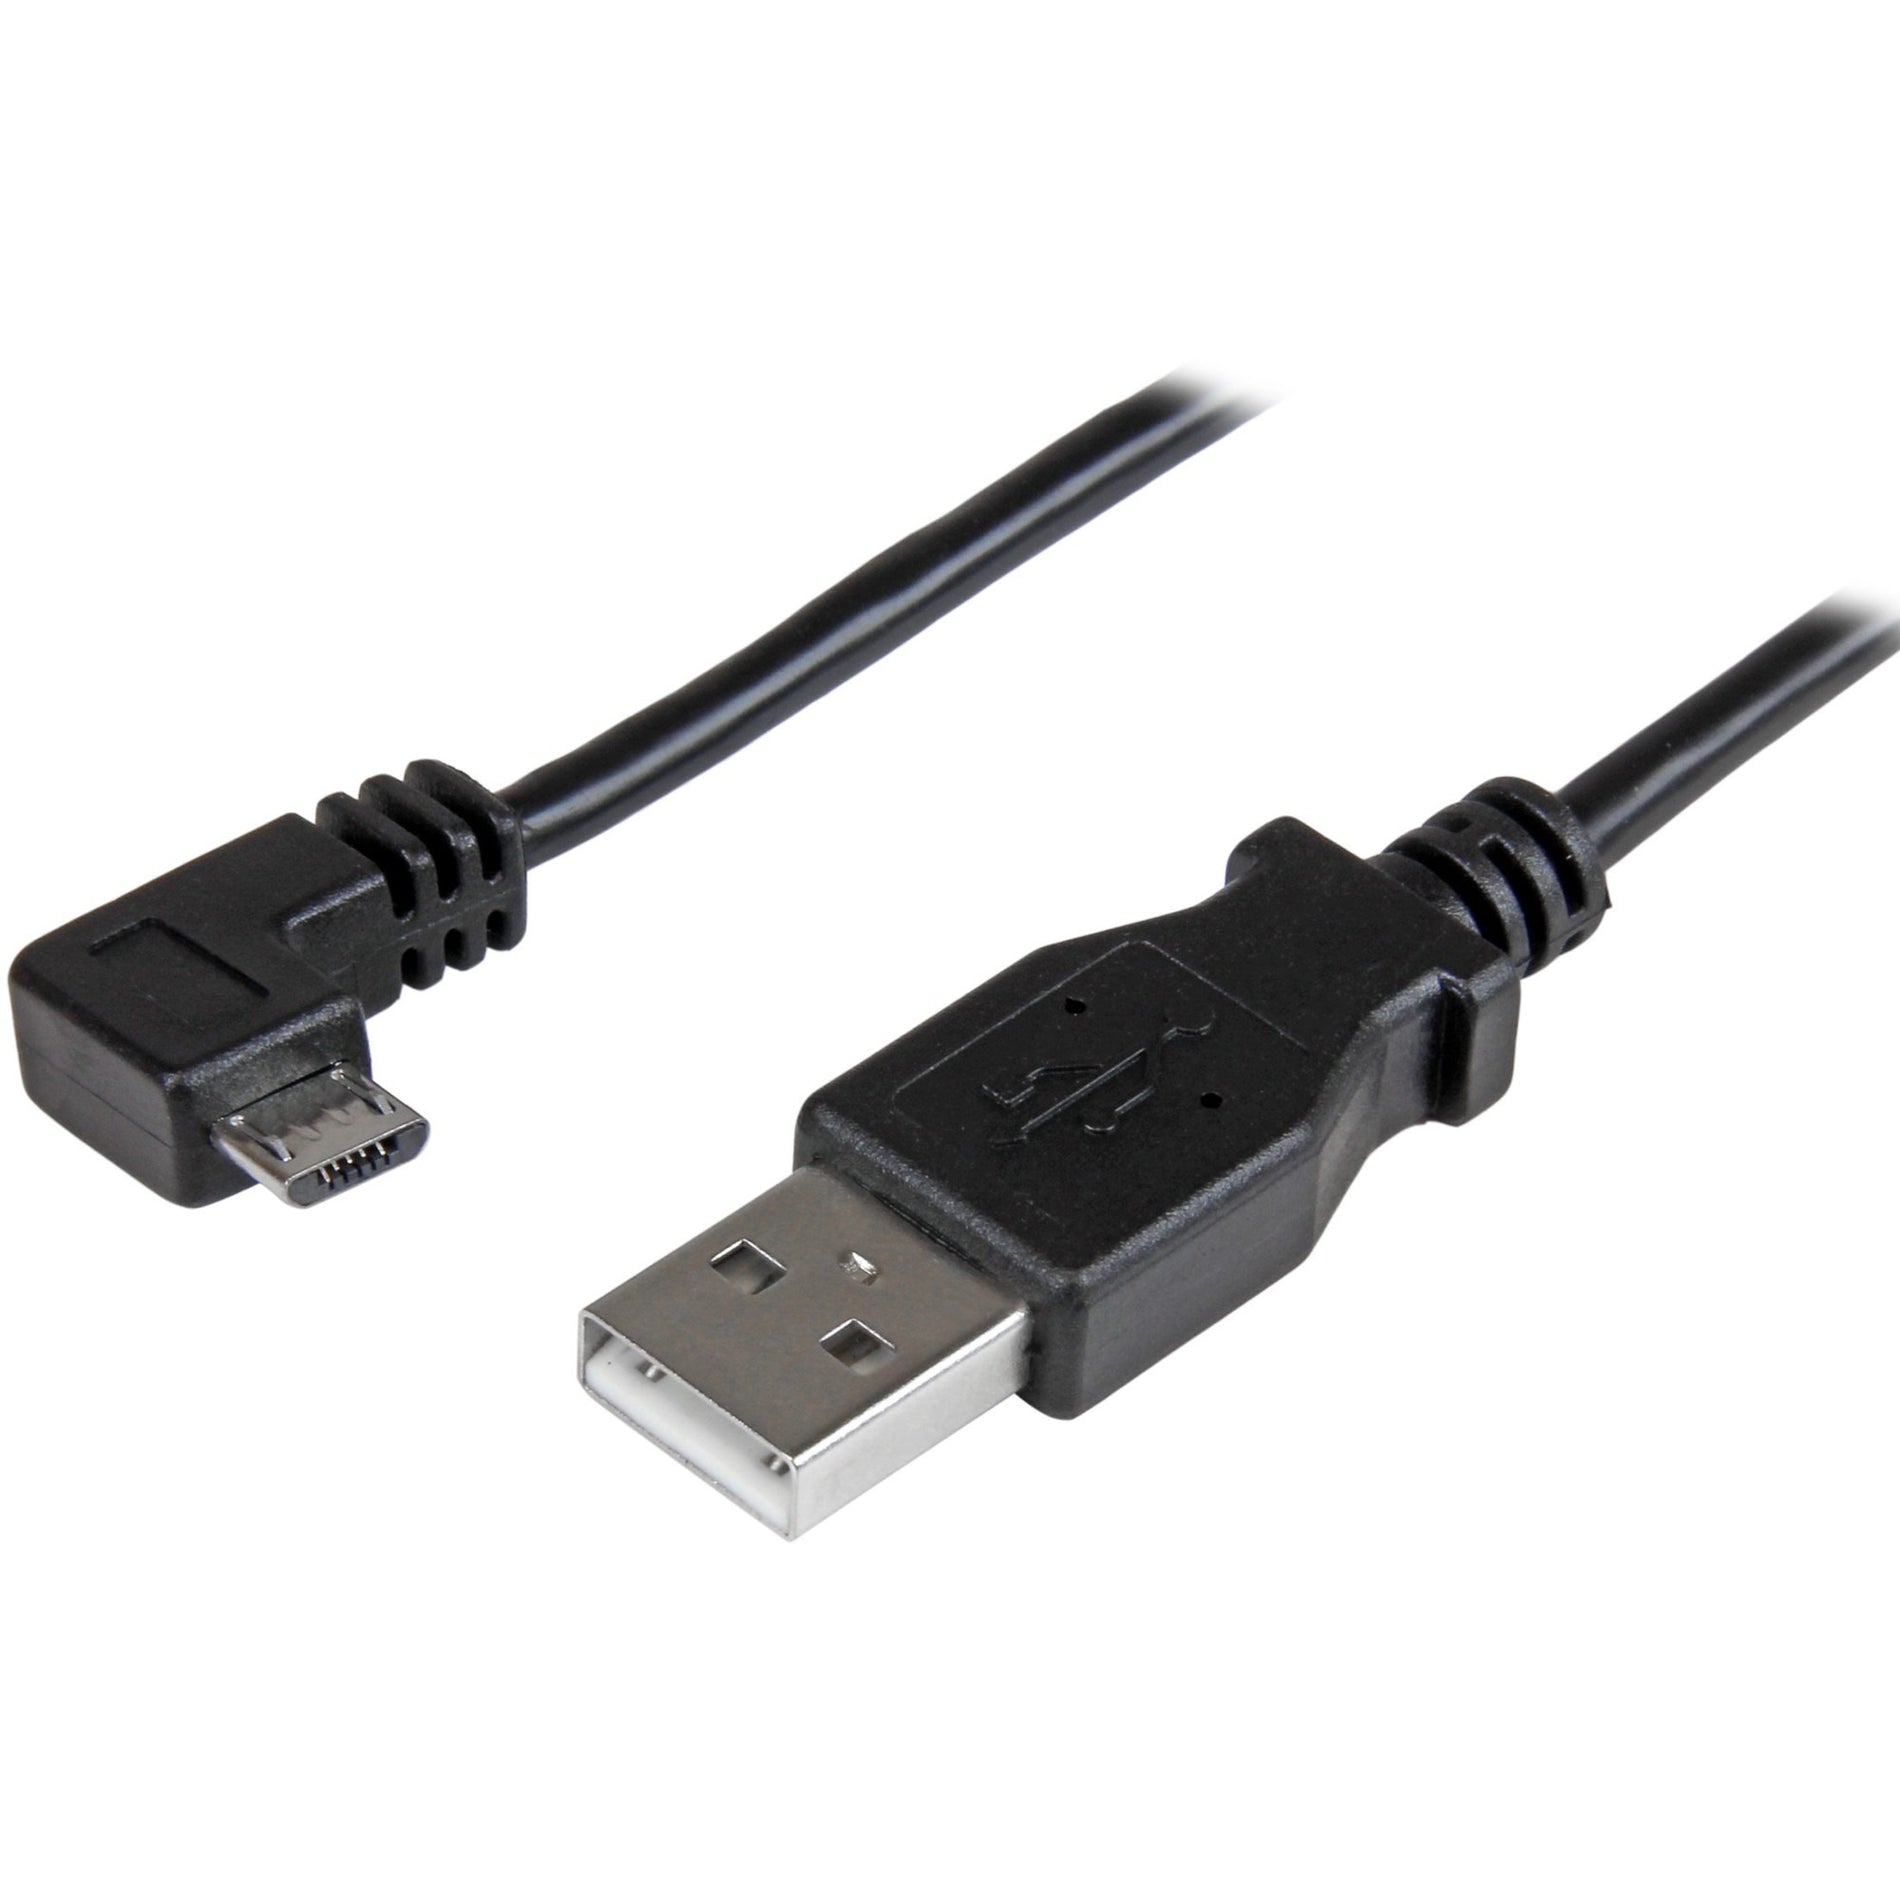 StarTech.com USBAUB50CMRA Micro-USB Charge-and-Sync Cable M/M - Right-Angle Micro-USB - 24 AWG - 0.5 m, Charge and Sync Cable, 24 AWG